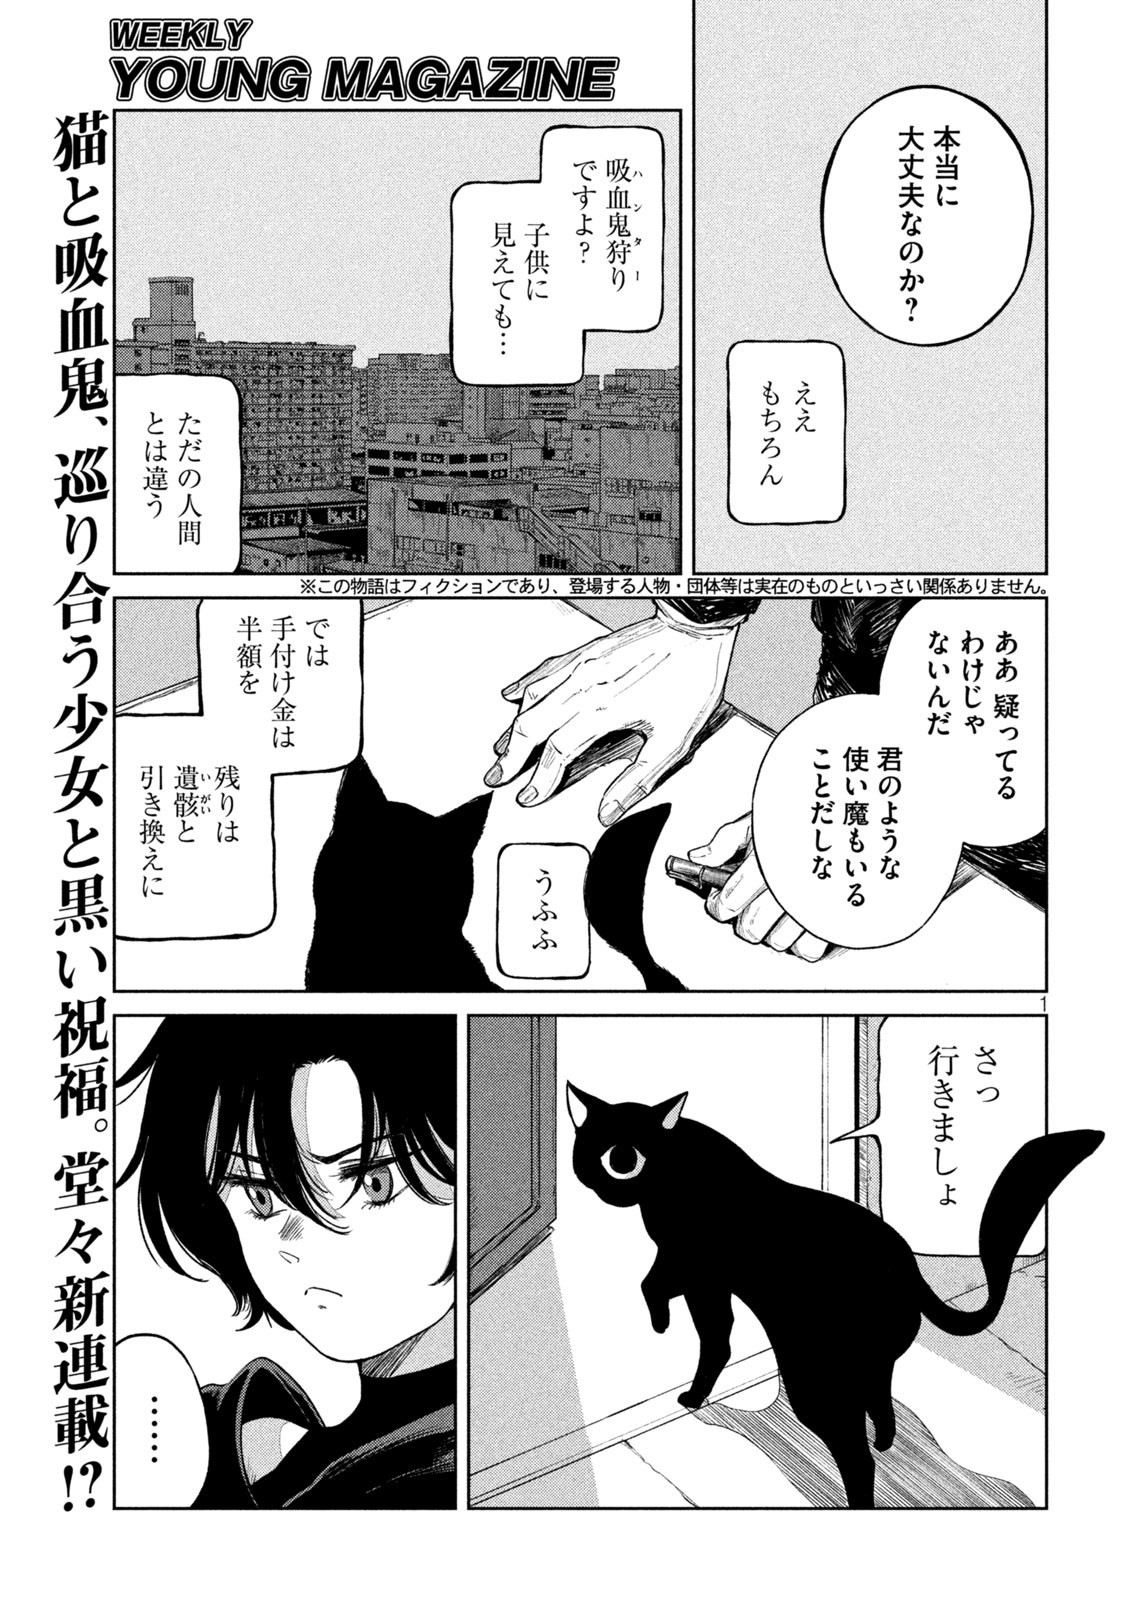 Ame to Kimi to - Chapter 101 - Page 1